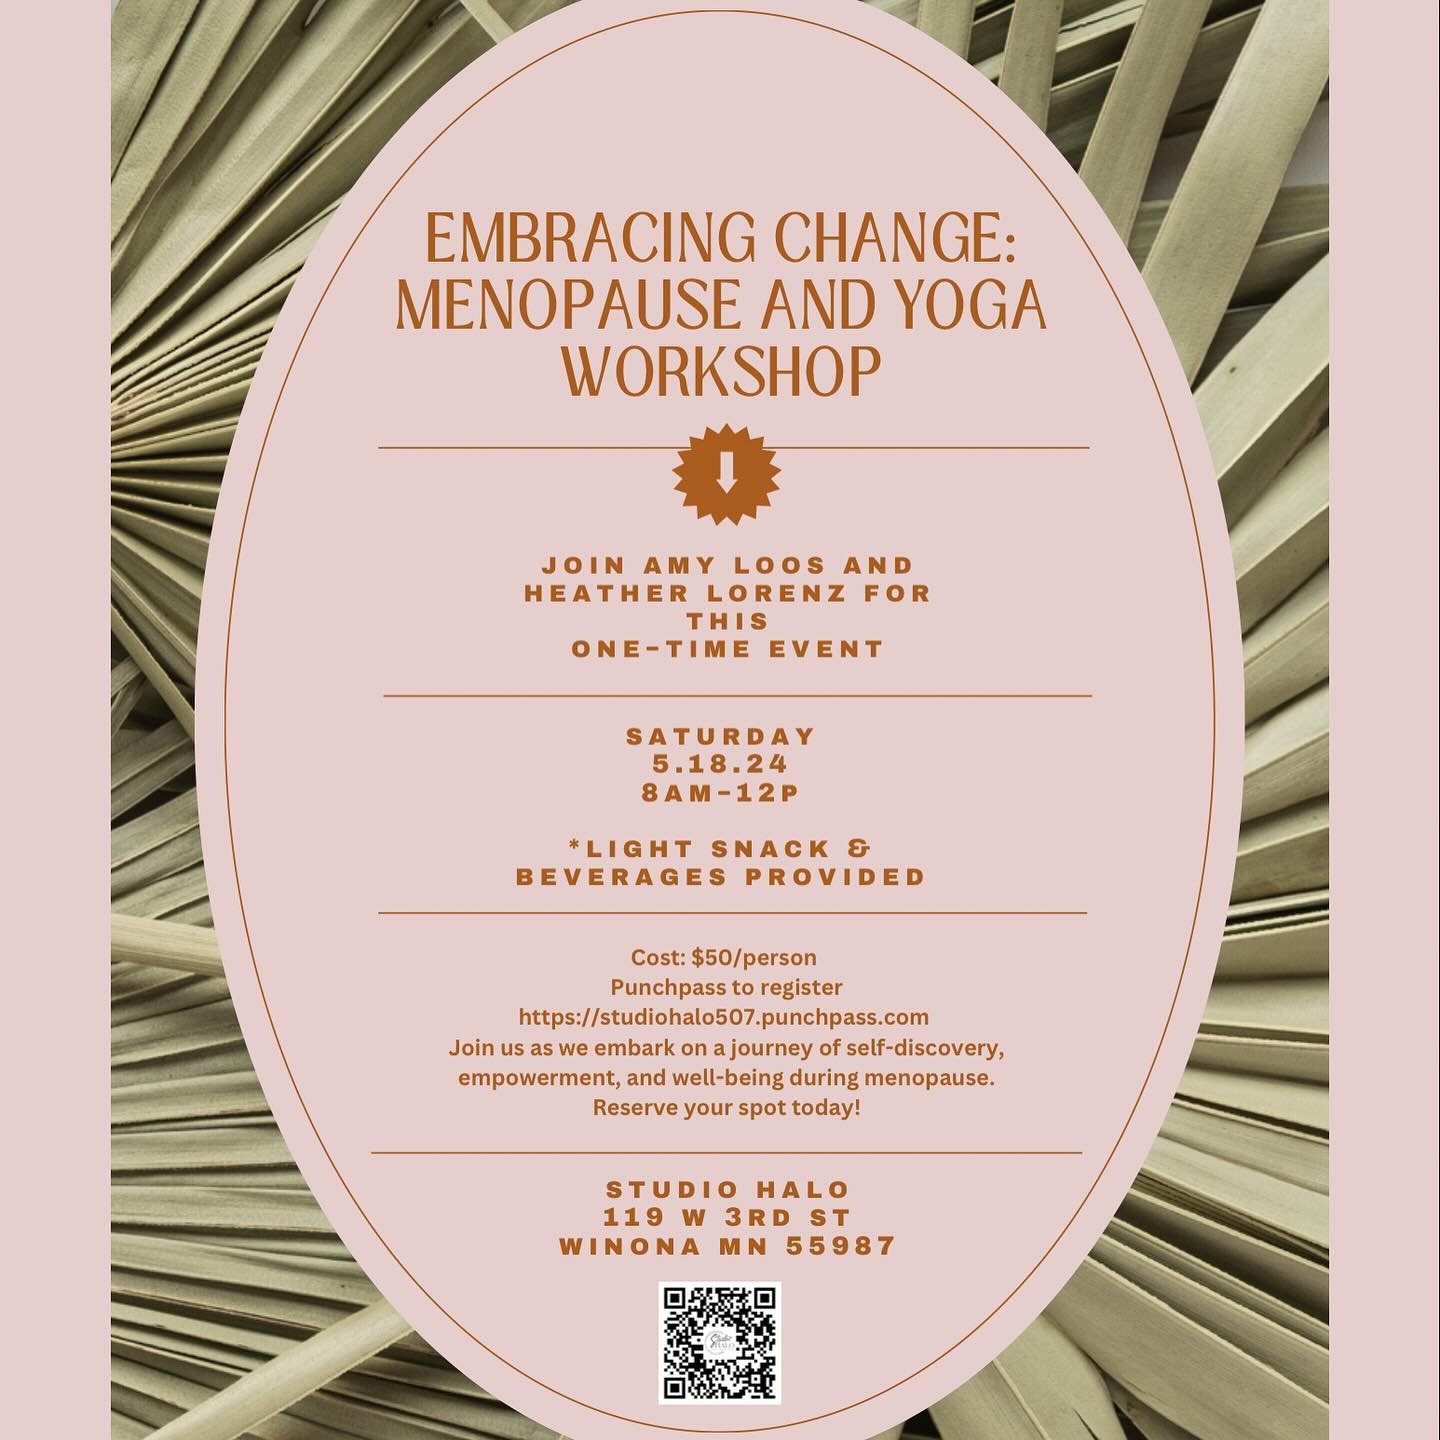 🌸 Announcement &amp; Invitation 🌸

Dear Women of All Ages,

Gather with us in a conversation on the transformative journey of menopause intertwined with the healing practice of yoga. This inclusive event celebrates women&rsquo;s wellness and aims t